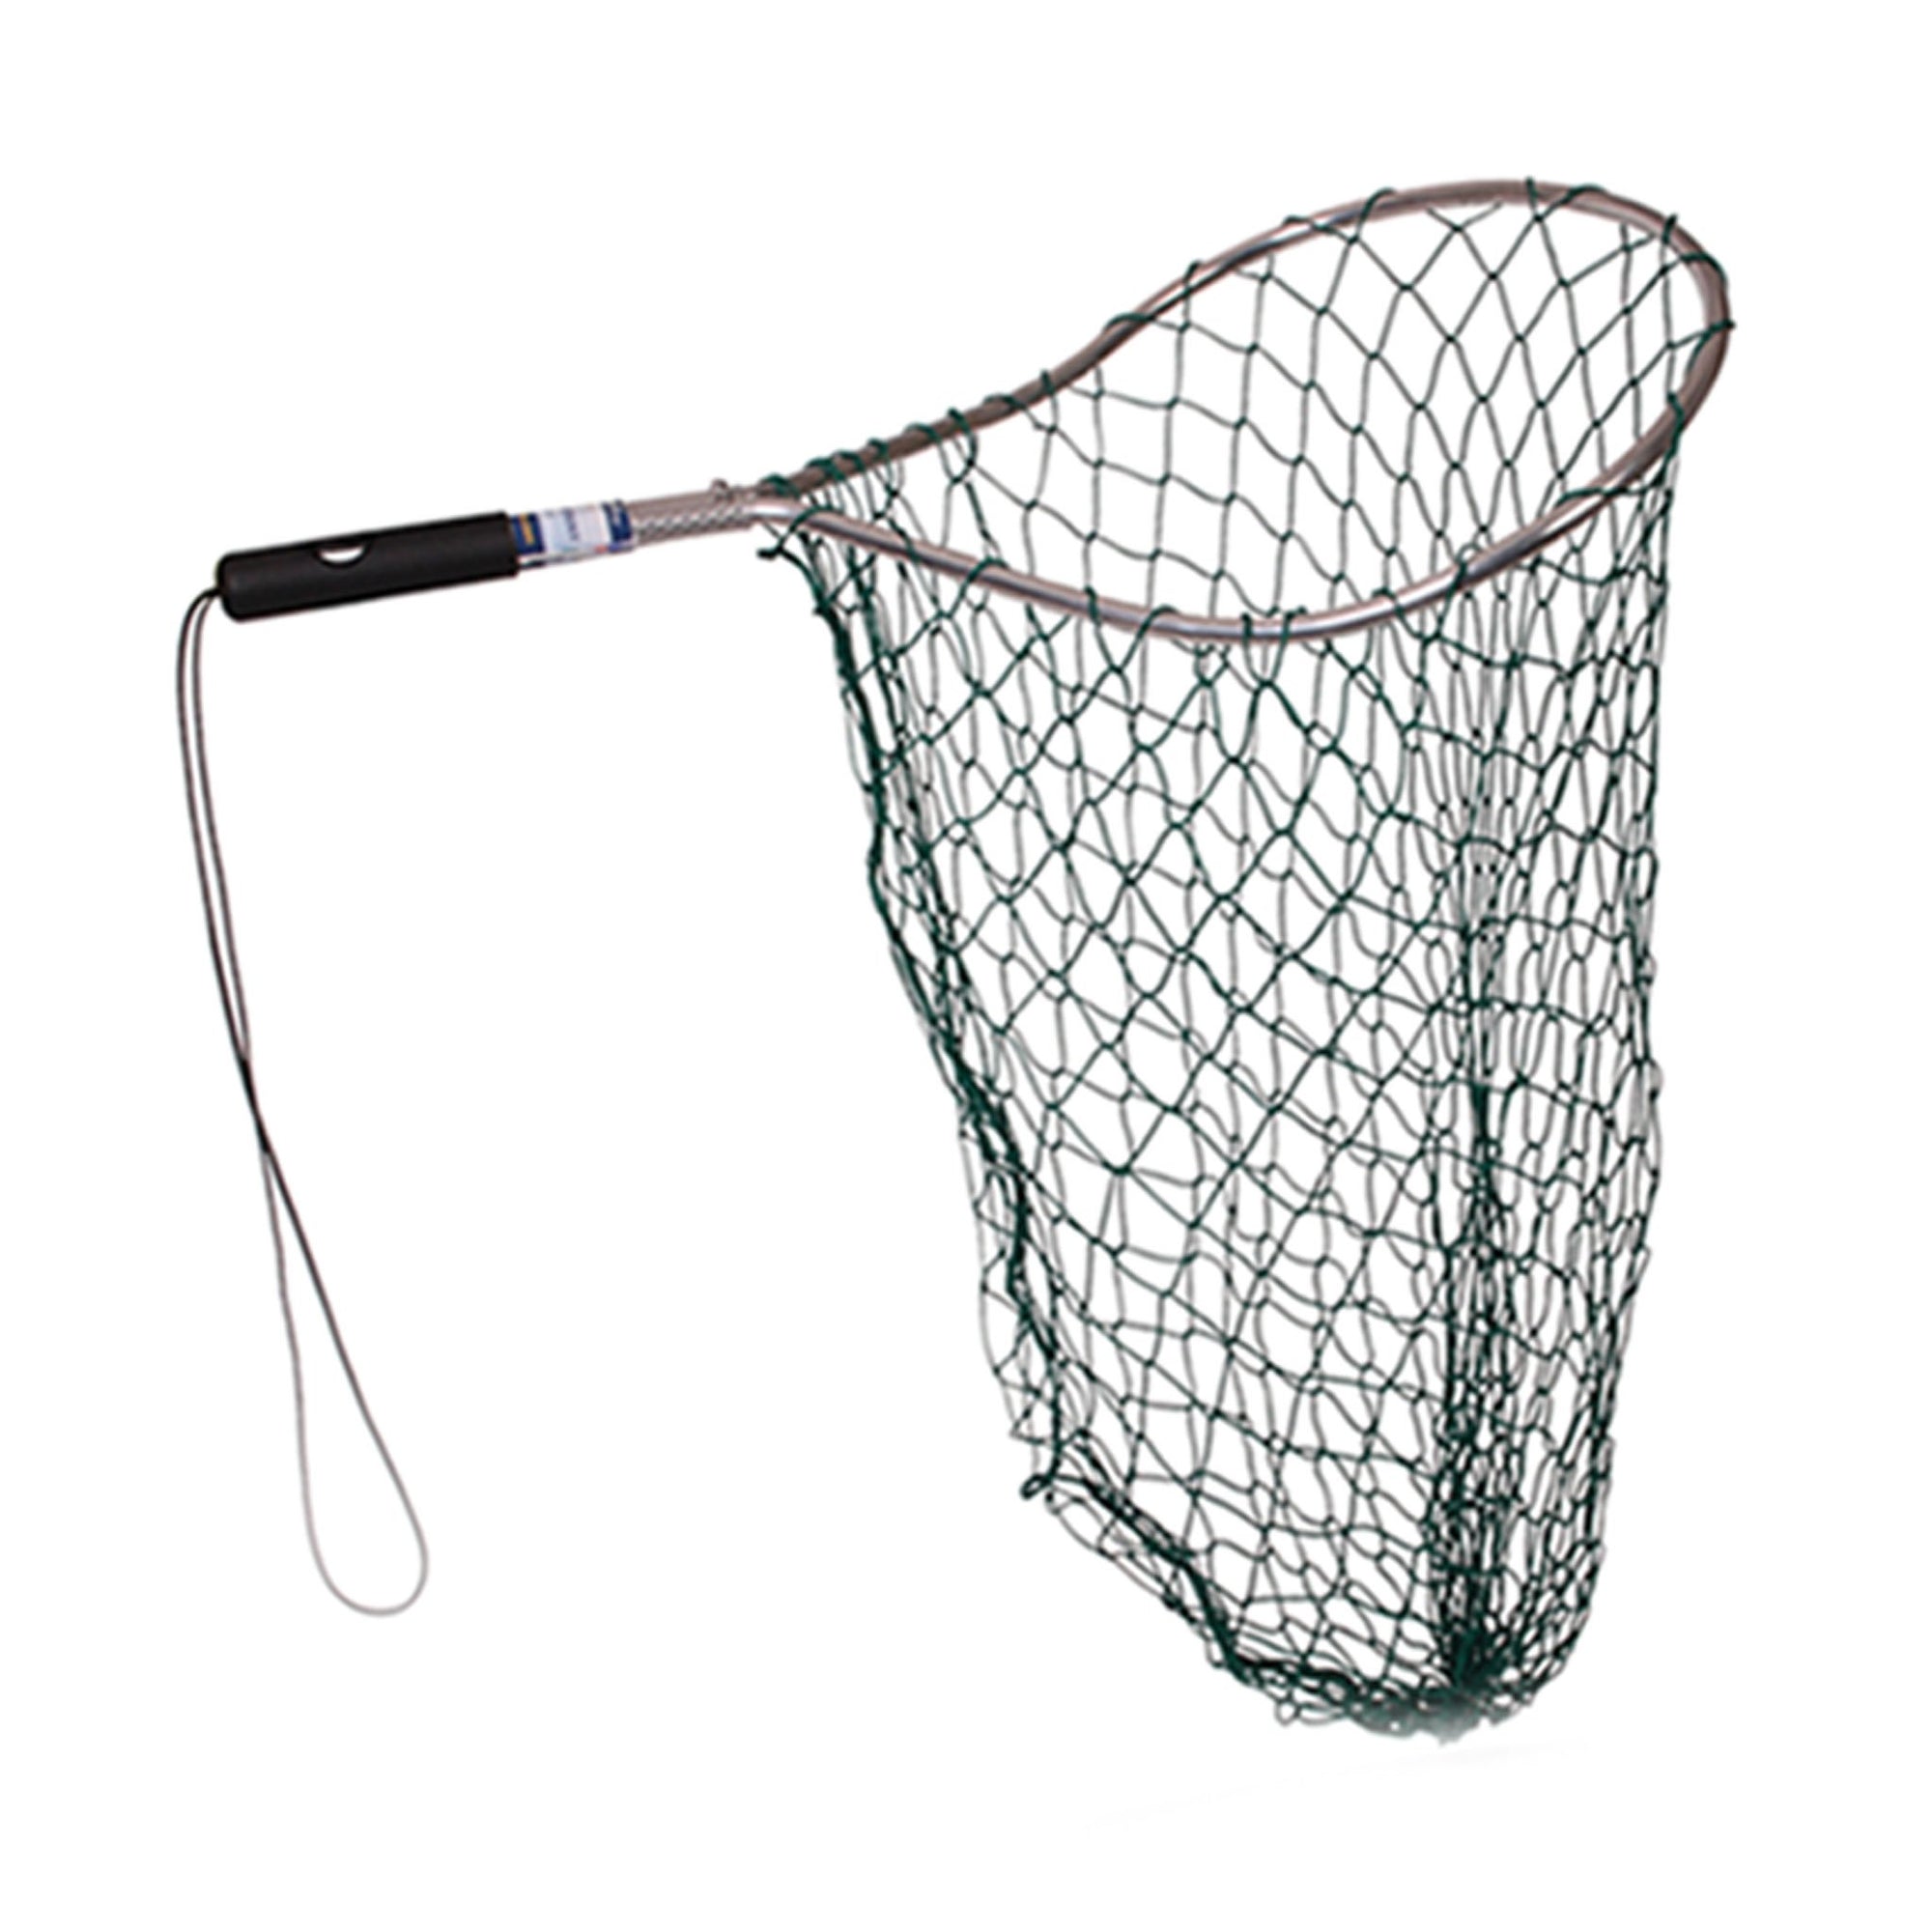 Big Game Heavy Duty KAYAK Net- ONLY $4.95 SHIPPING !!!